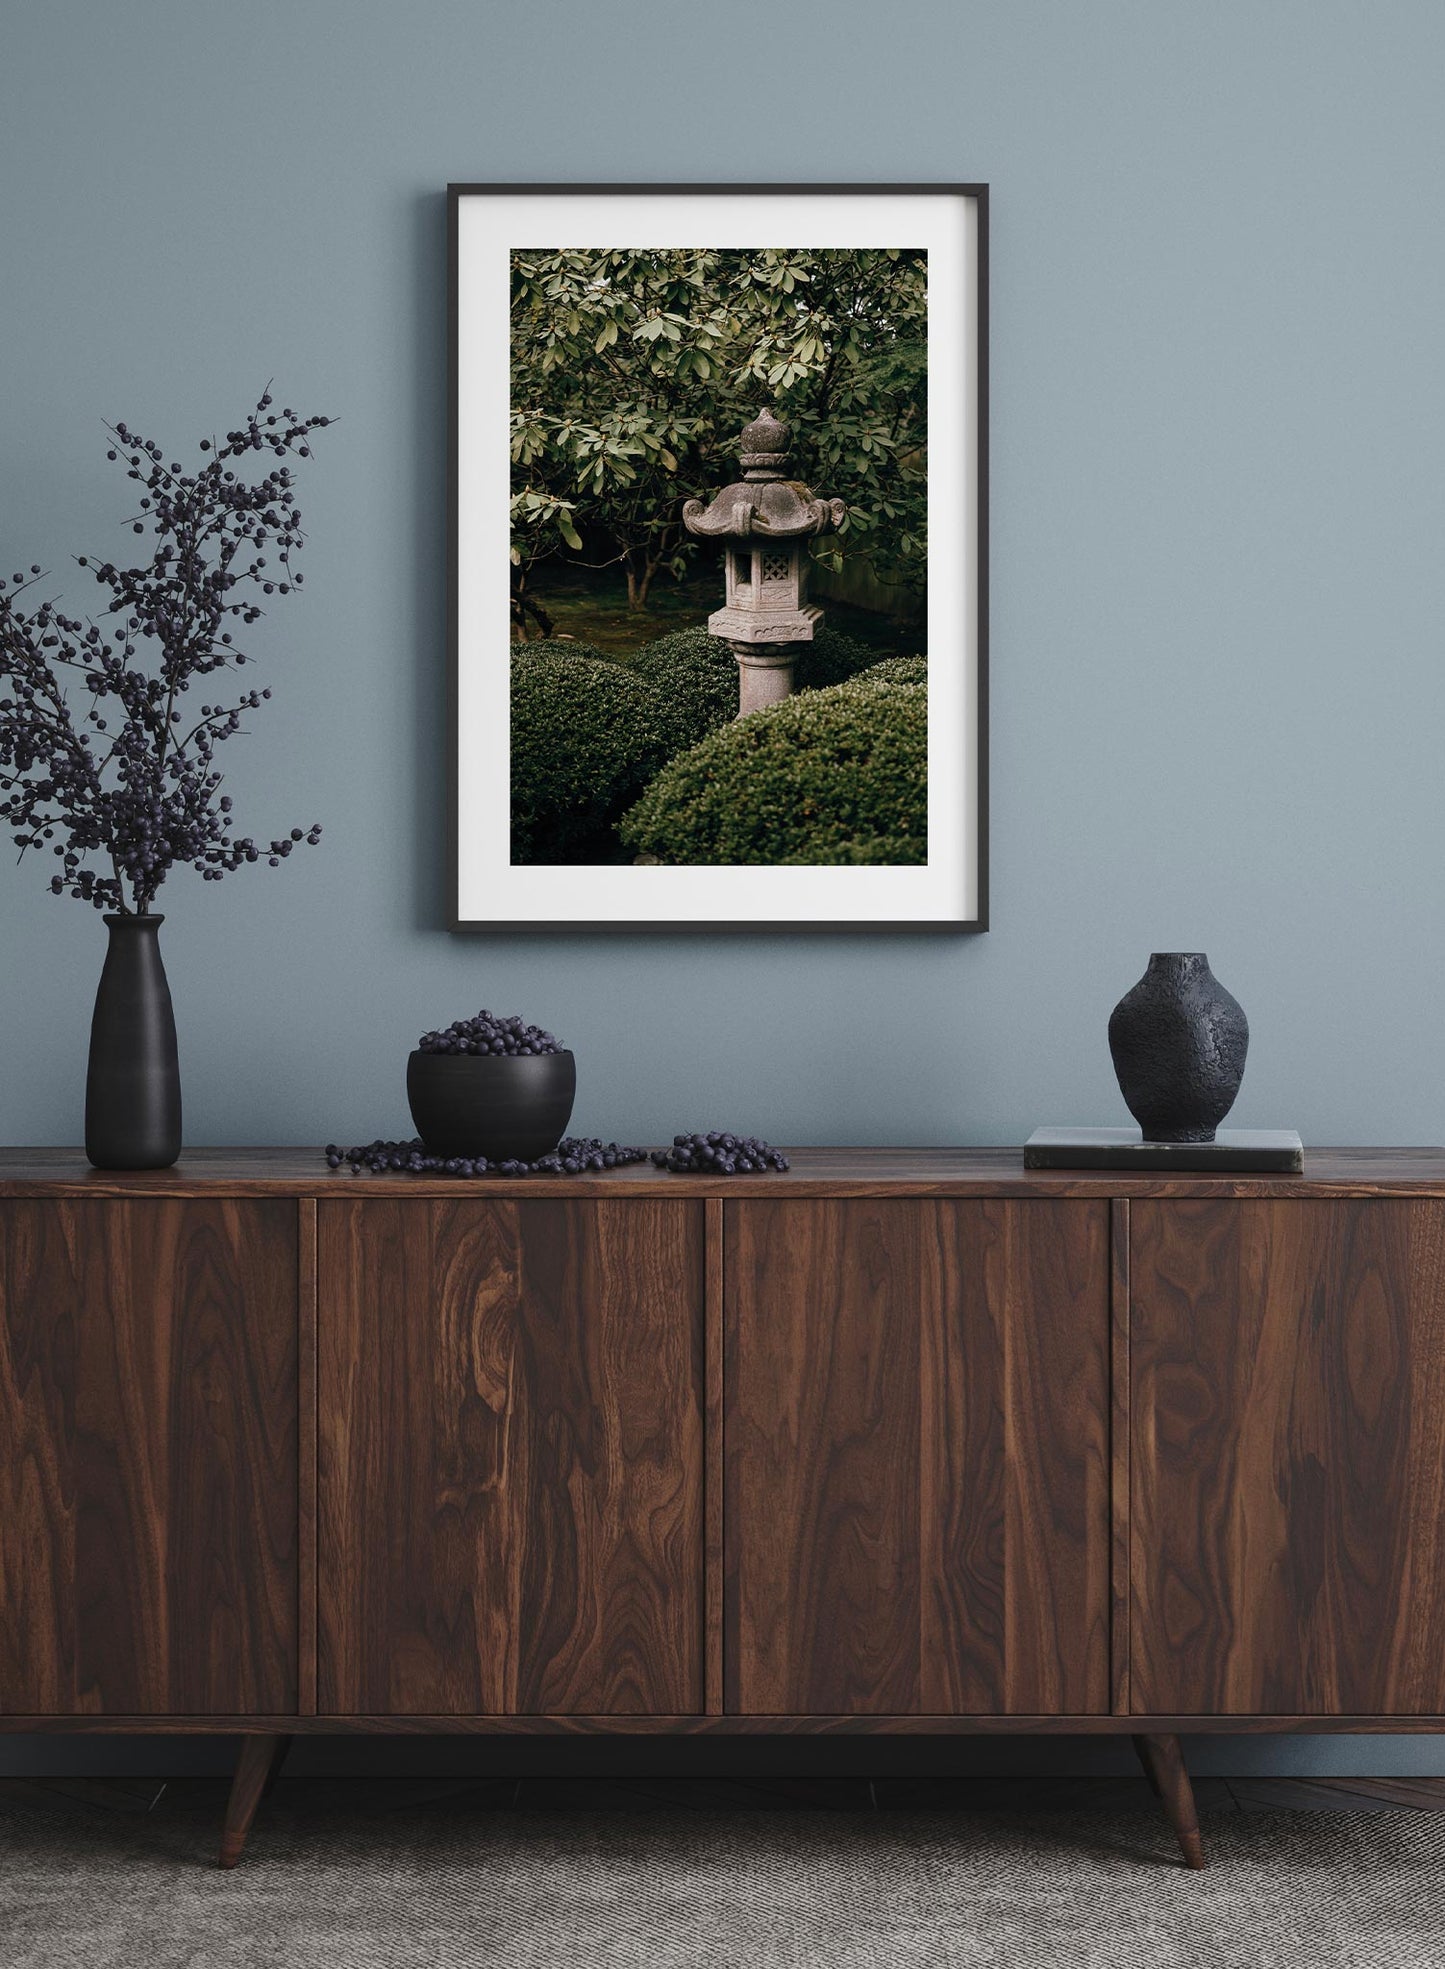 Temple is a minimalist photography by Opposite Wall of a Japanese lantern commonly found in temples.